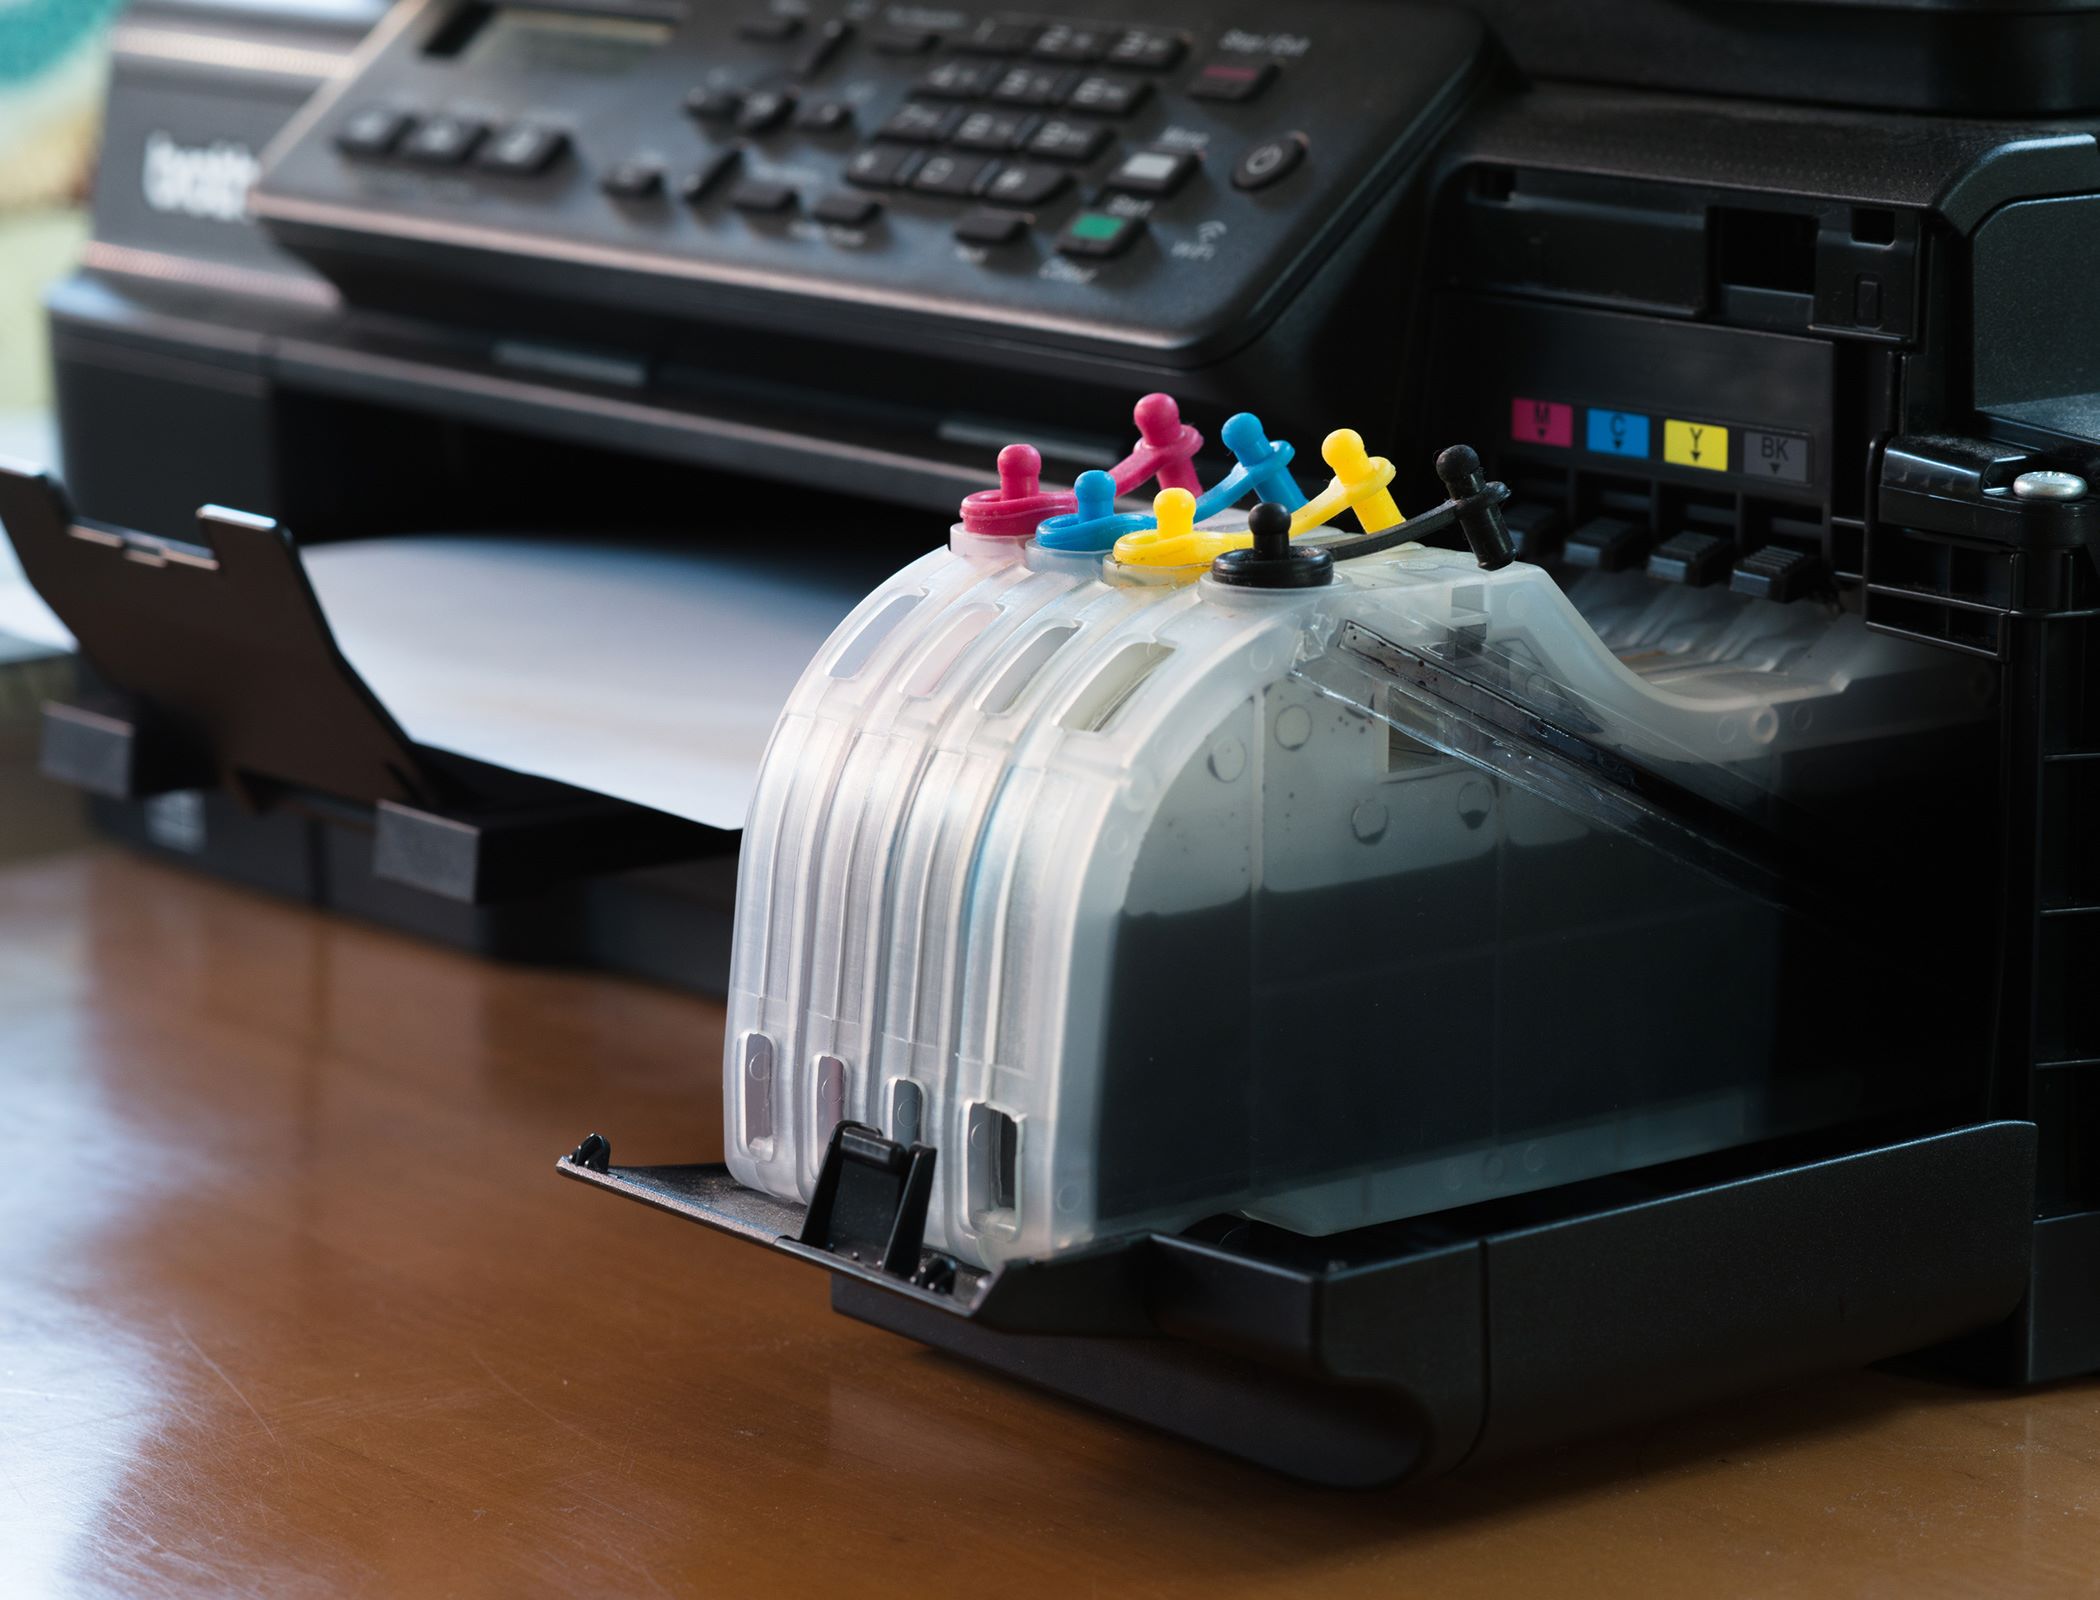 How To Get A Printer To Print In Color